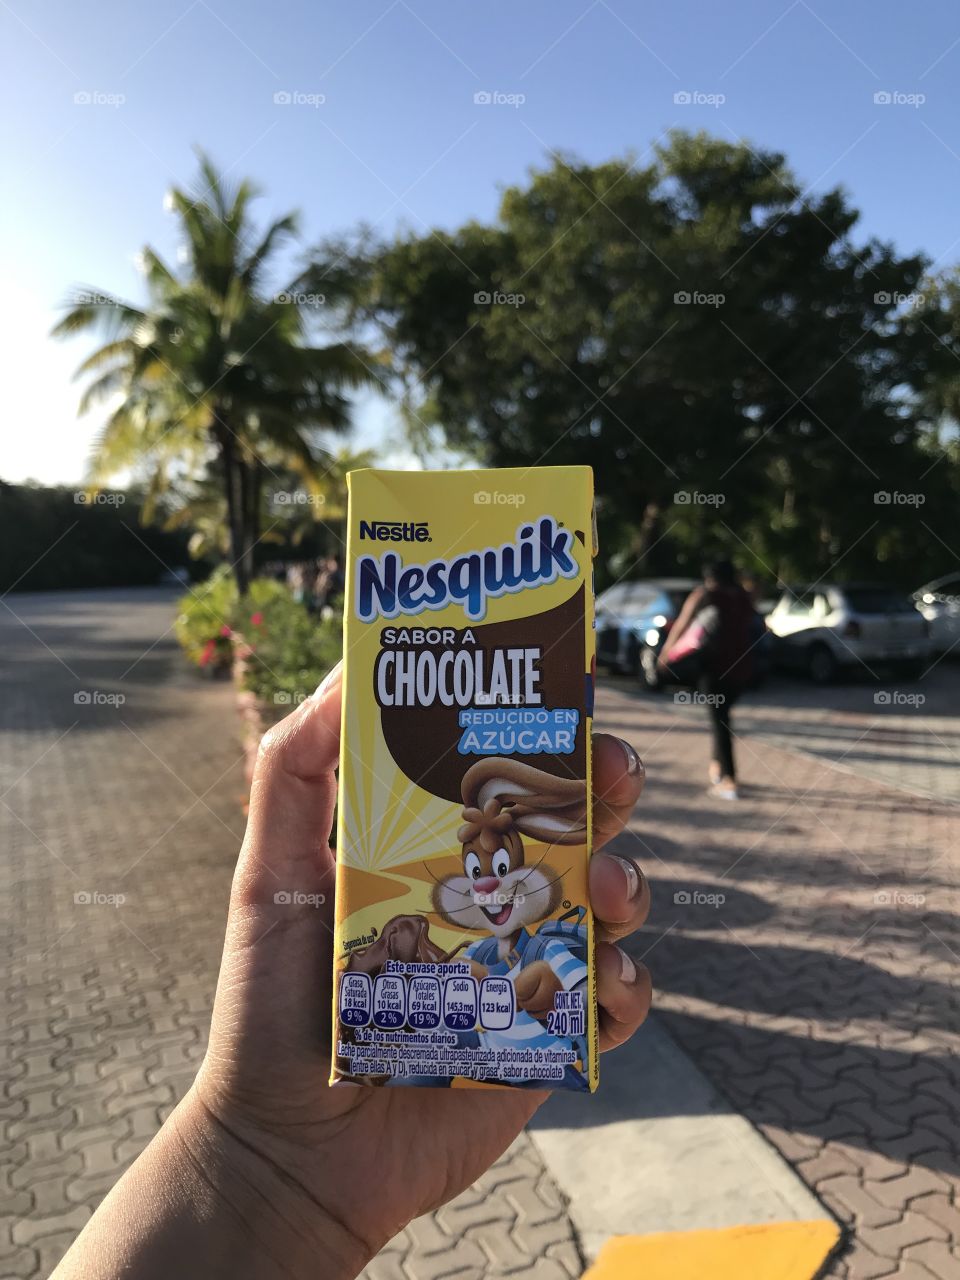 I had this refreshing drink when I was in Mexico being a tourist. Chocolate milk makes me happy 😊